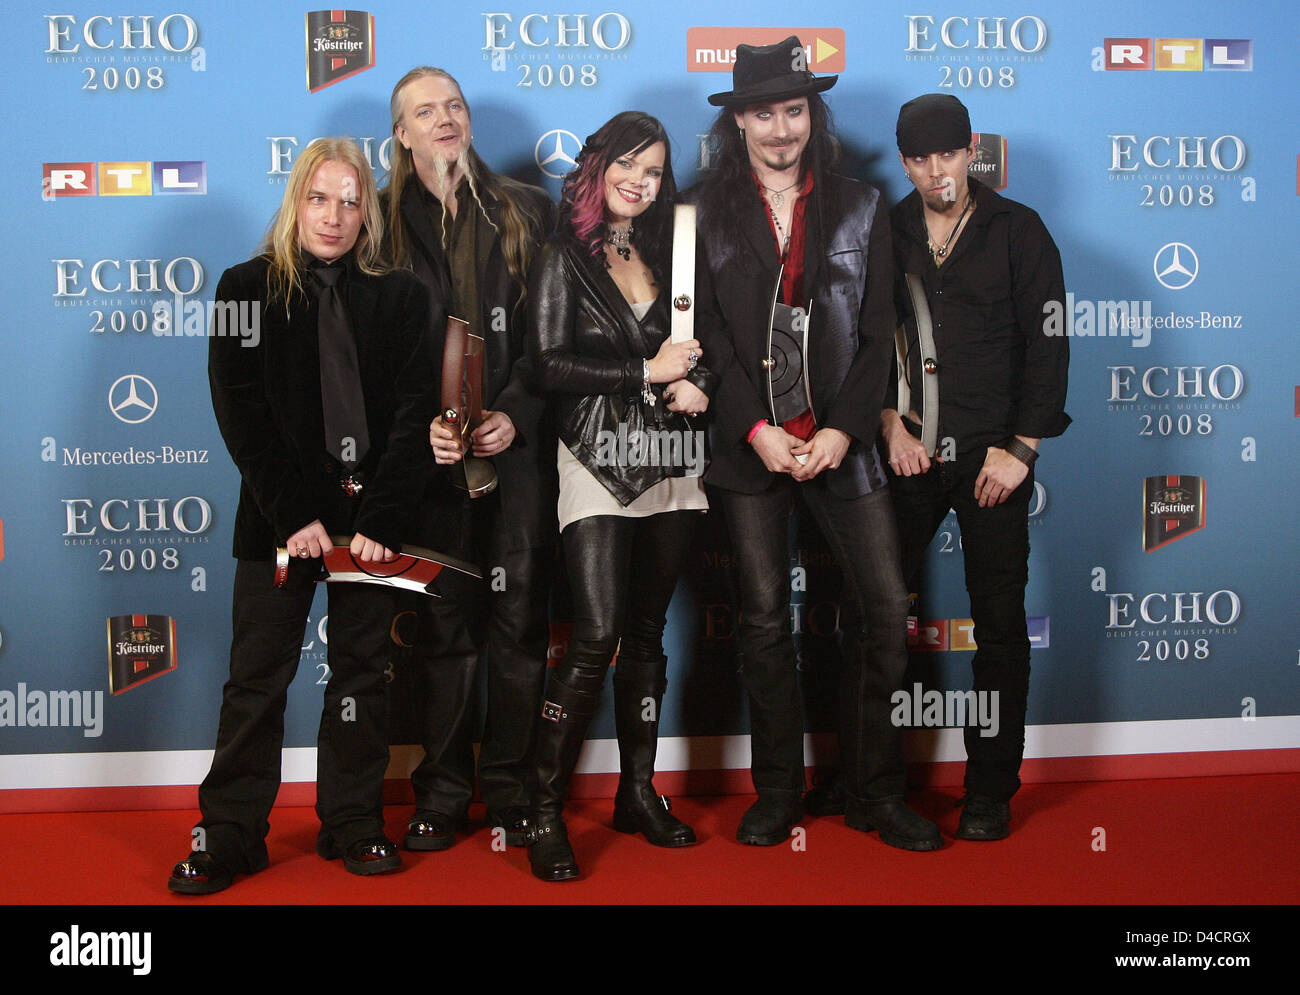 (L-R) Finnish metal band Nightwish, guitarist Emppu Vuorinen, bassist Marco Tapani Hietala, singer Anette Olzon, keyboarder Tuomas Holopainen, and drummer Jukka 'Julius' Nevalainen, pose with their ECHO awards after the award ceremony of the 17th Echo Award in Berlin, Germany, 15 February 2008. Neightwish received an ECHO 'Band International Rock/Alternative', one of the 25 awards  Stock Photo